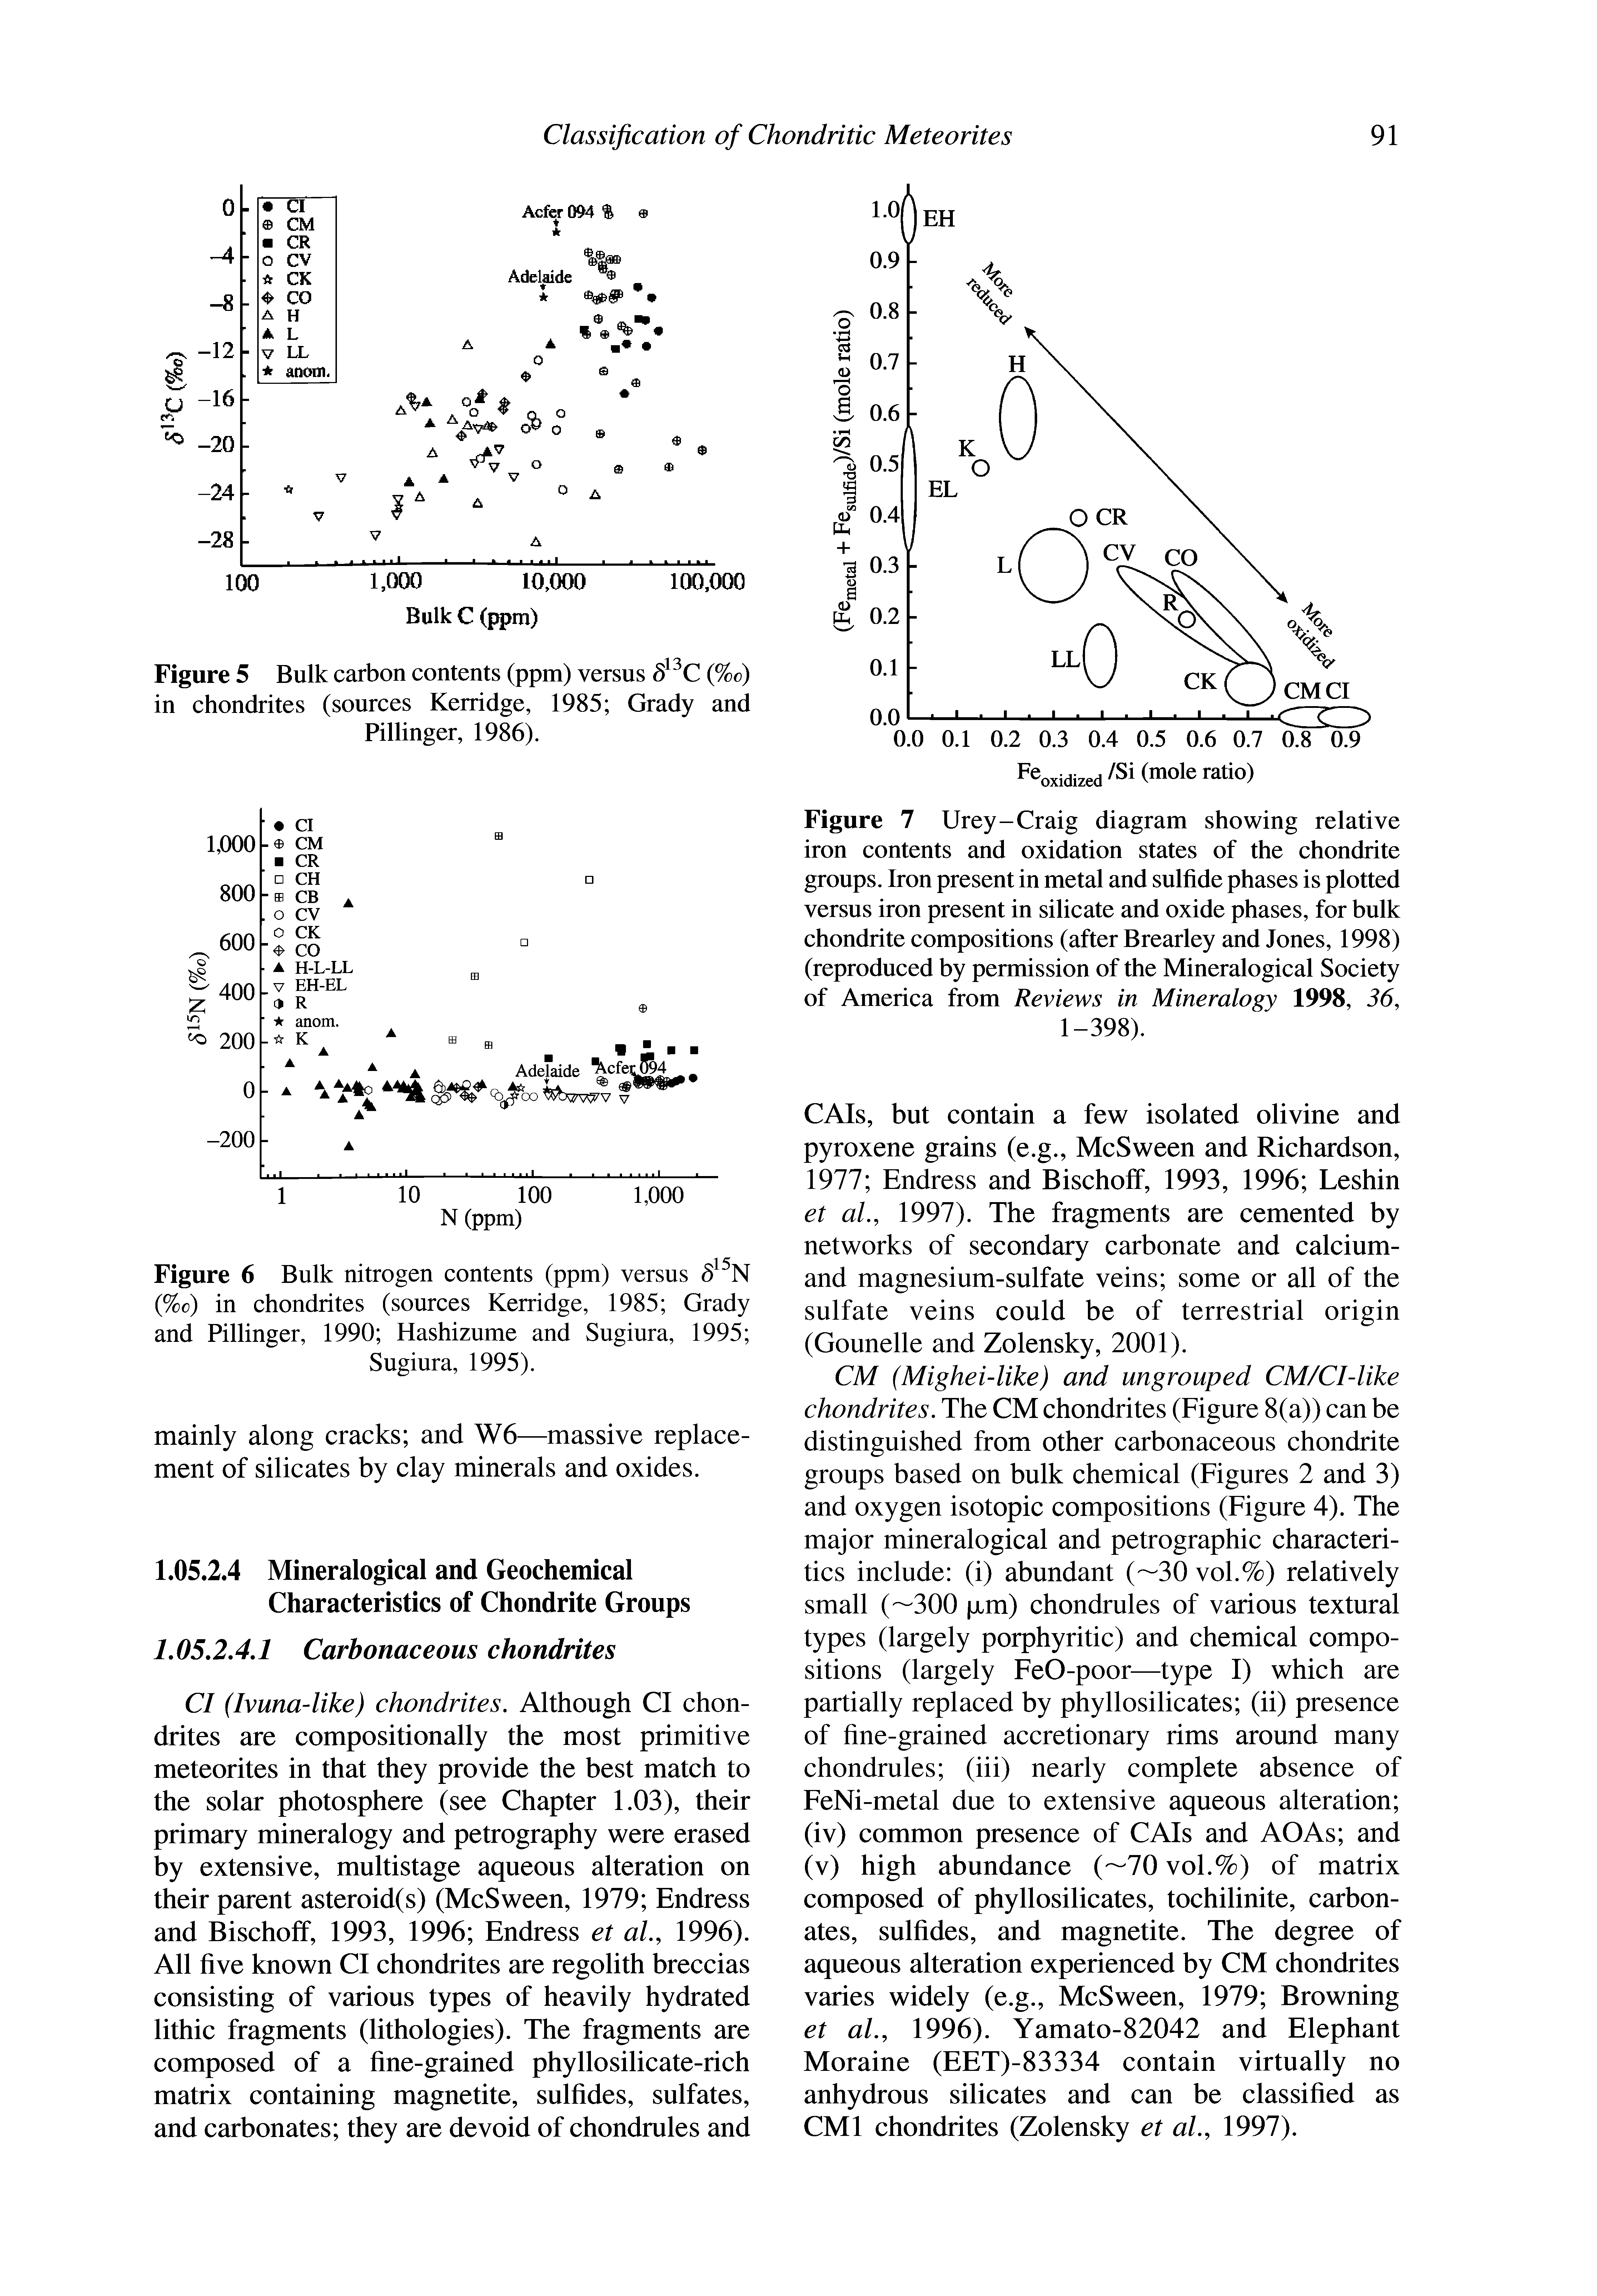 Figure 7 Urey-Craig diagram showing relative iron contents and oxidation states of the chondrite groups. Iron present in metal and sulfide phases is plotted versus iron present in silicate and oxide phases, for bulk chondrite compositions (after Brearley and Jones, 1998) (reproduced by permission of the Mineralogical Society of America from Reviews in Mineralogy 1998, 36, 1-398).